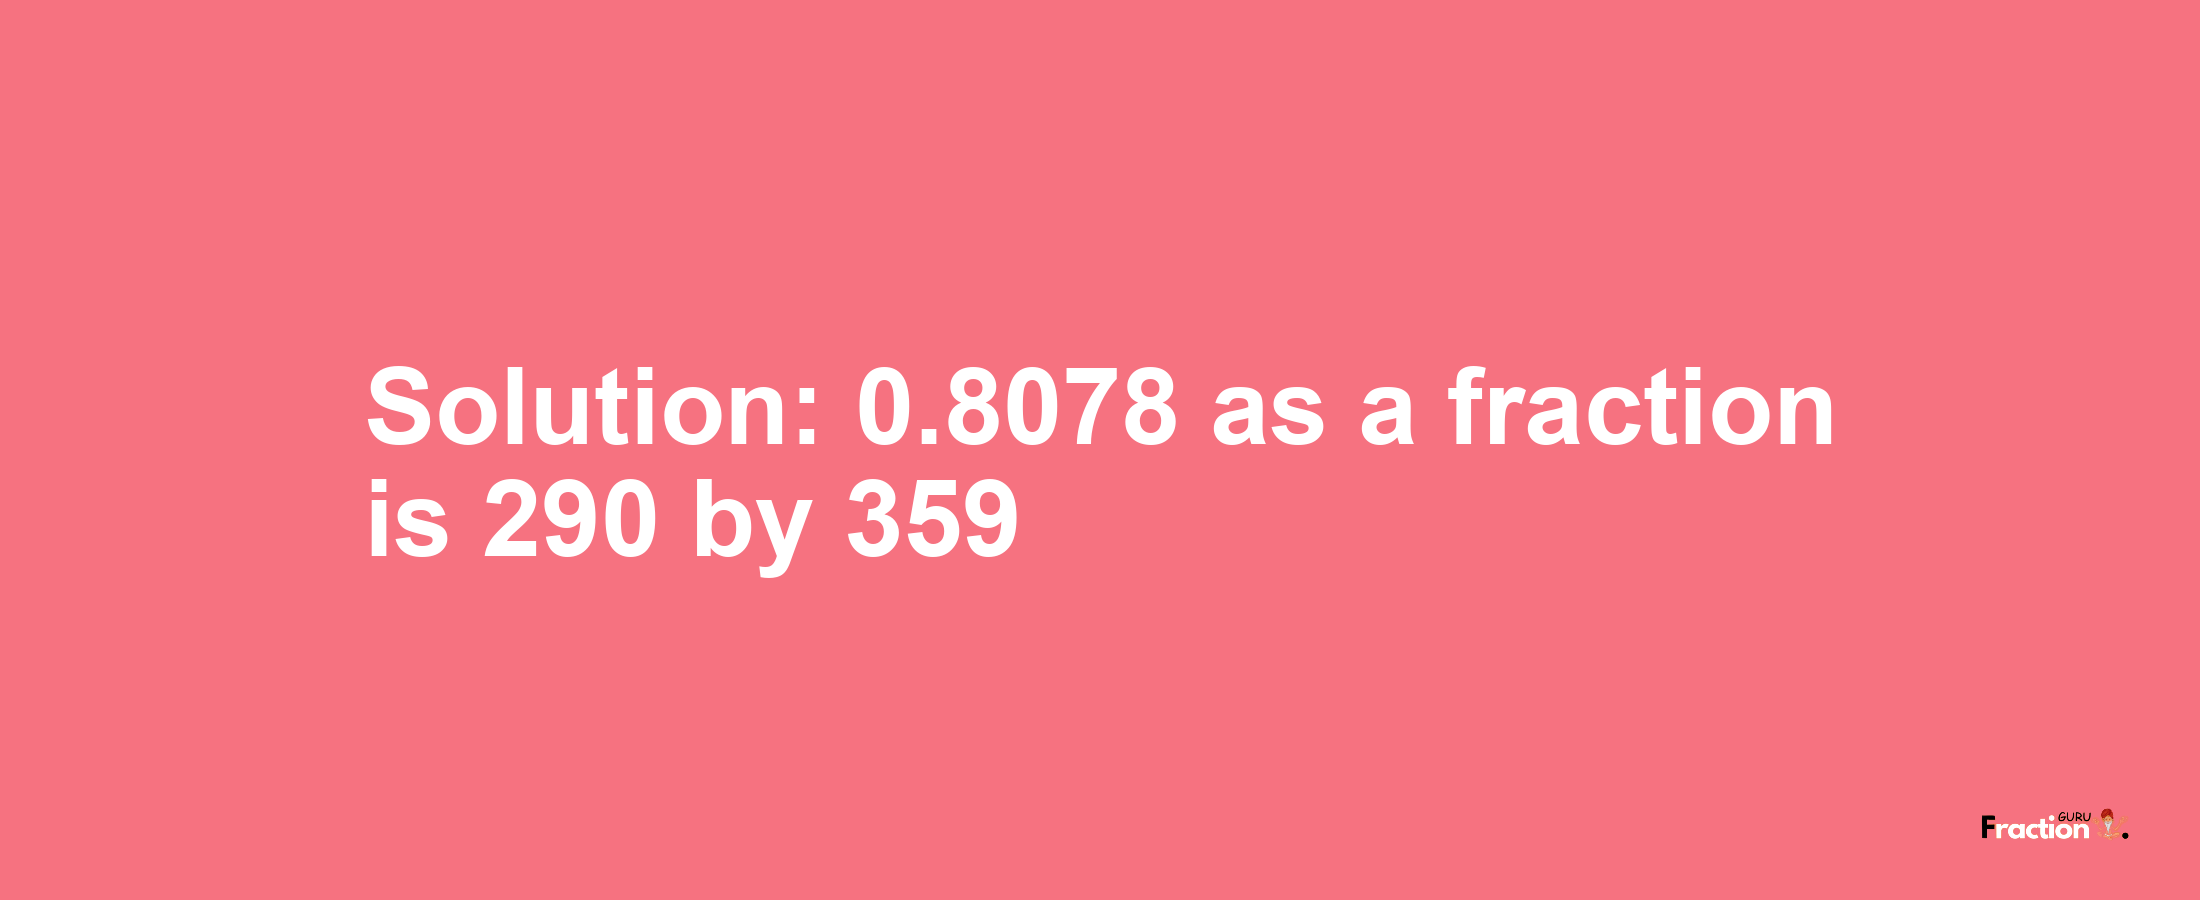 Solution:0.8078 as a fraction is 290/359